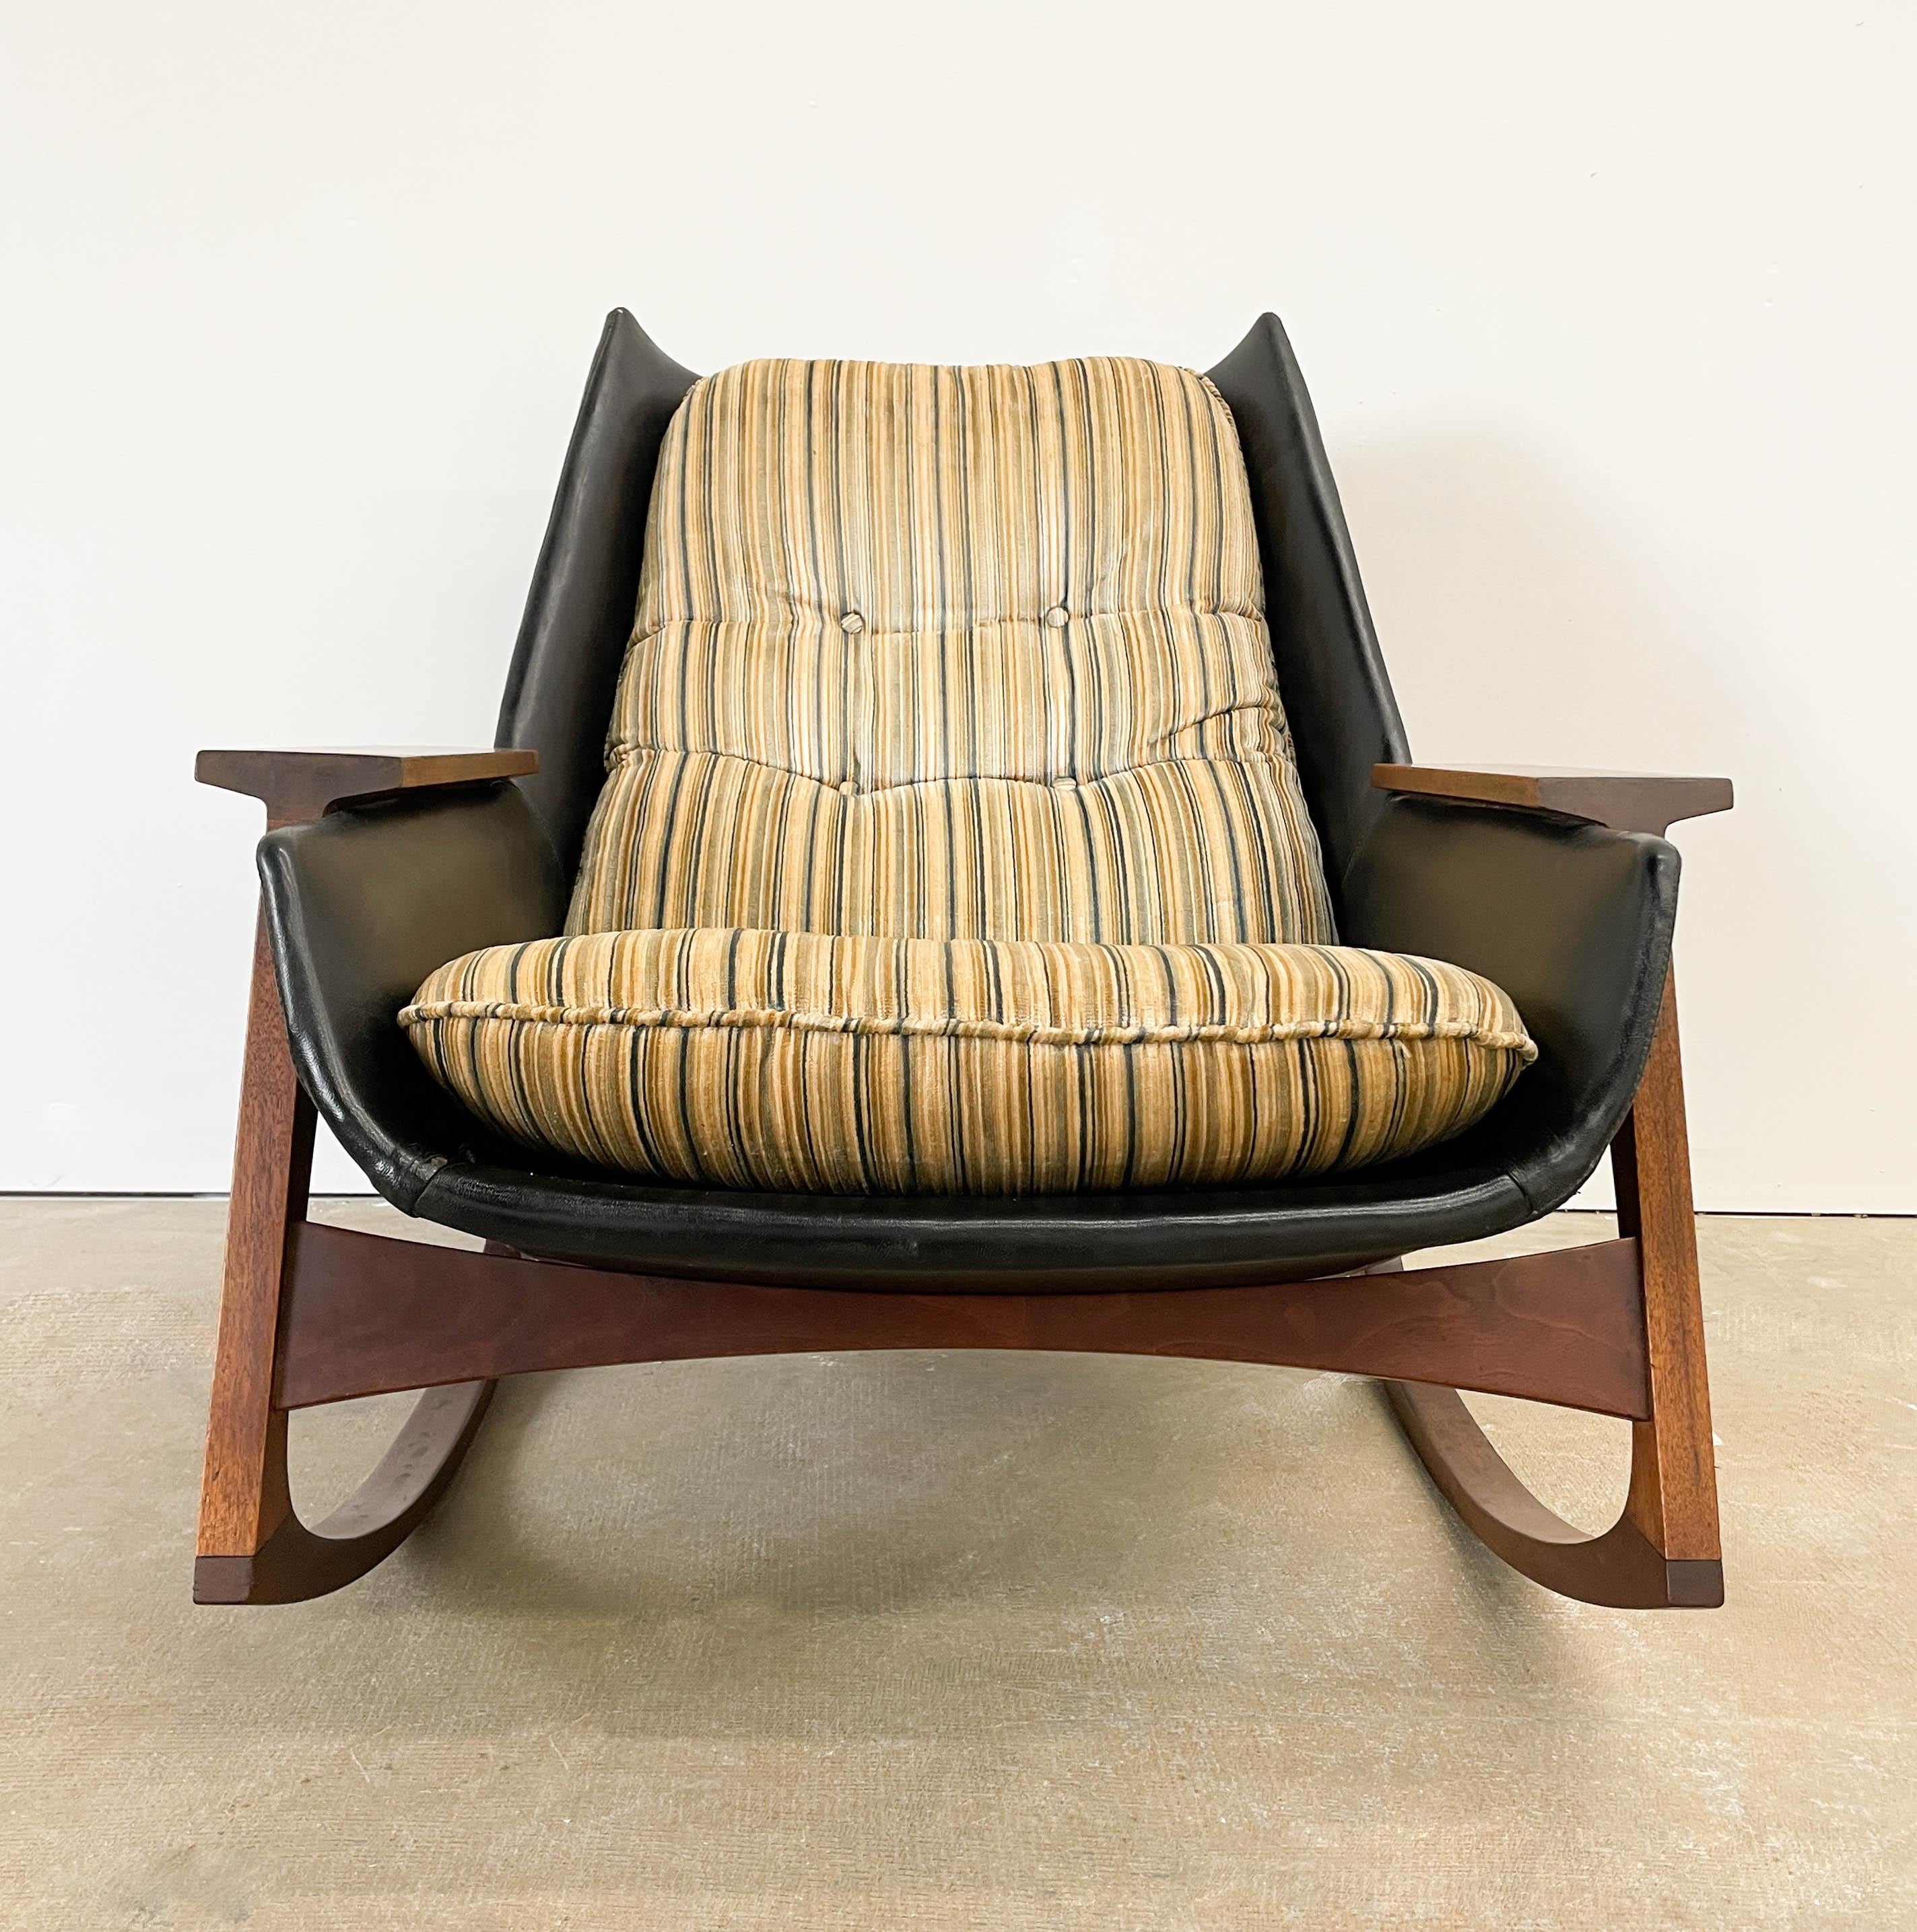 This is a rare Malabar rocking chair designed by Mel Abitz in 1962 for Galloway's of Tampa. A very modern design, this comfortable low rocking chair has great lines, an attractive walnut frame, and a bent plywood shell seat. The original Naugahyde